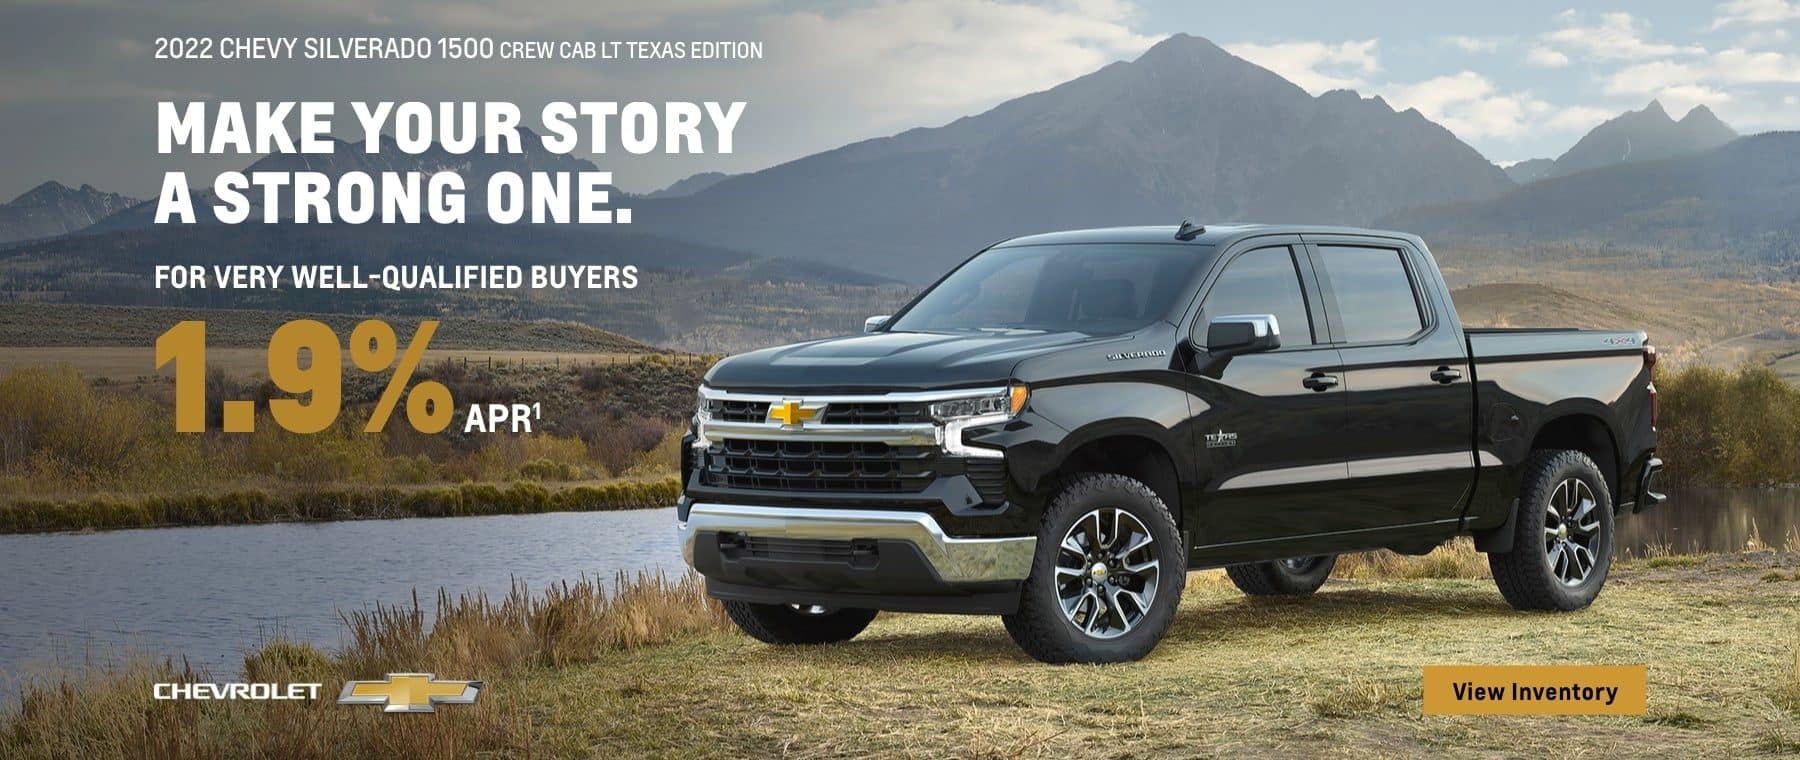 2022 Chevy Silverado 1500 Crew Cab LT Texas Edition. Make your story a strong one. For very well-qualified buyers 1.9% APR.